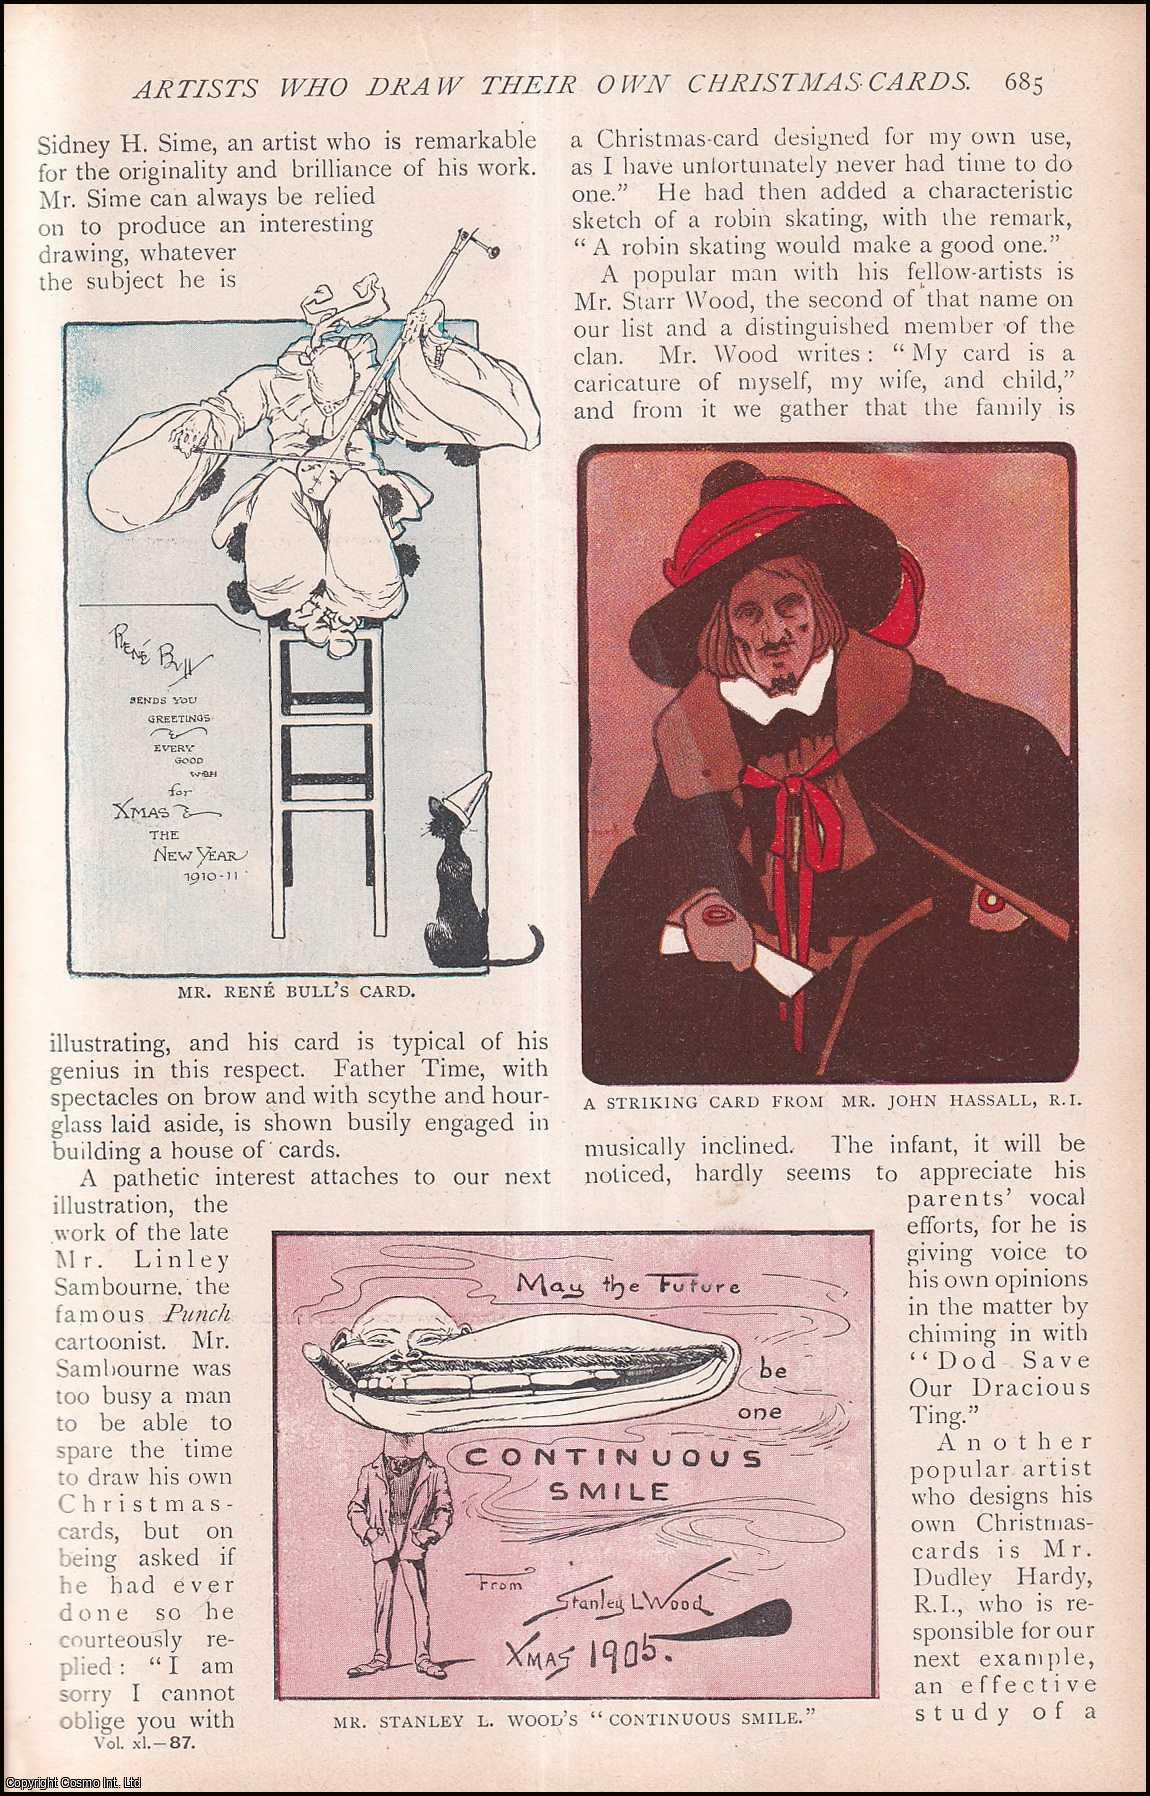 J. Sydney Boot - Artists that Draw their own Christmas Cards : Mr. John Hassall, R.I ; Mr. Stanley L. Wood ; Mr. Tom Browne ; Mr. R. Percy Gossop & others. An uncommon original article from The Strand Magazine, 1910.